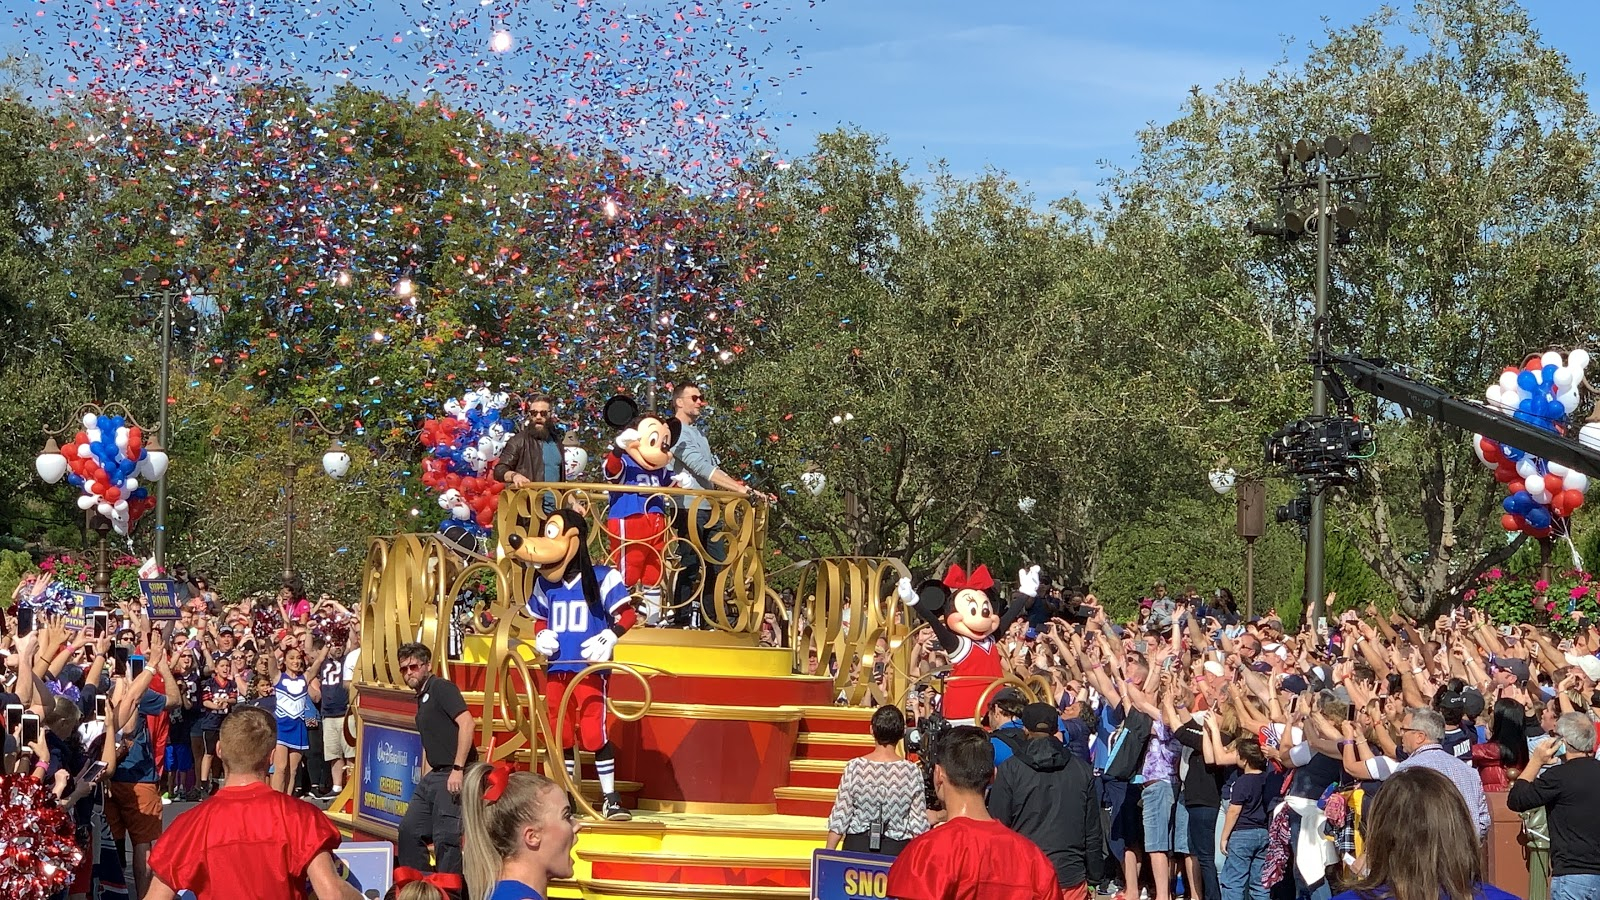 New England Patriots Champs to Appear at Walt Disney World for Super Bowl Celebration